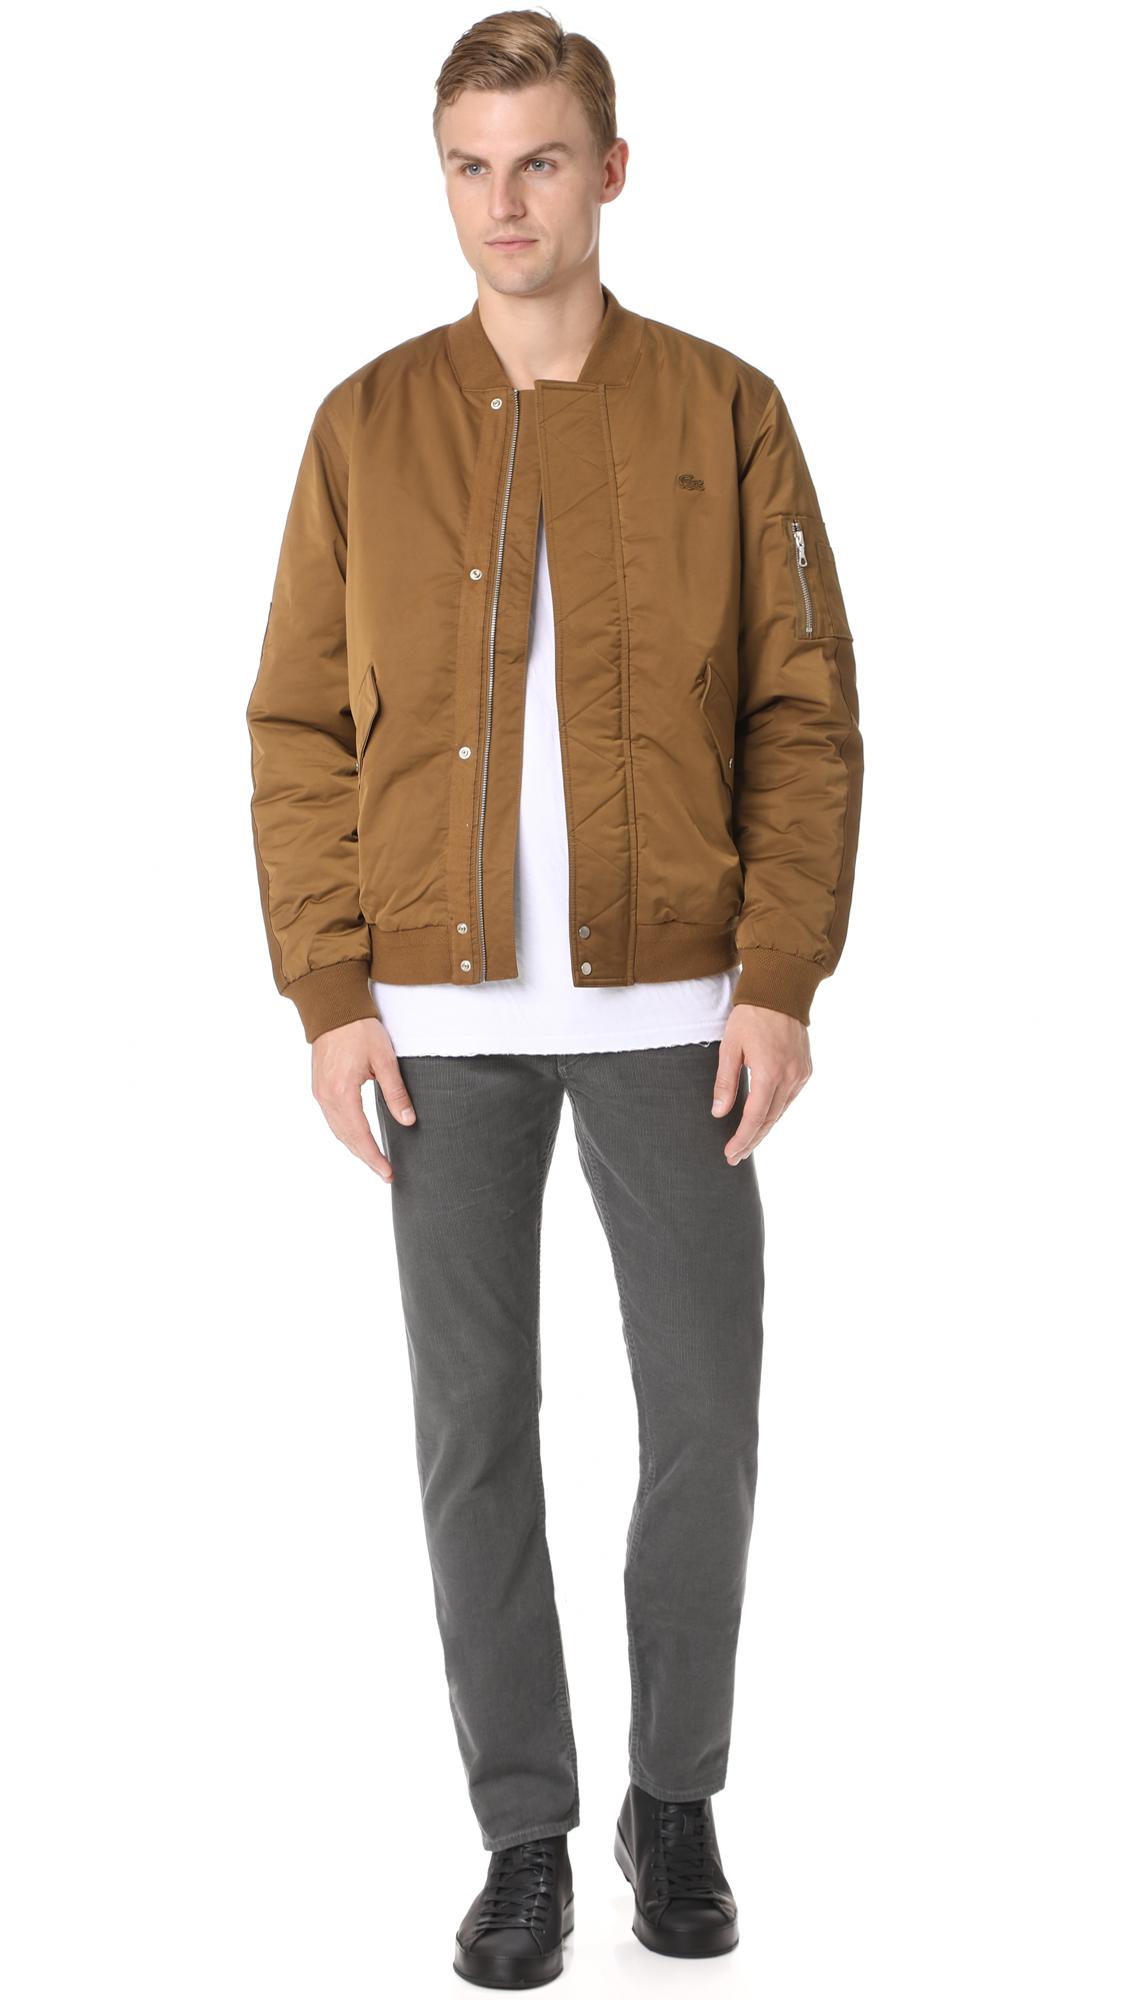 Lacoste Synthetic Padded Bomber Jacket in Brown for Men - Lyst